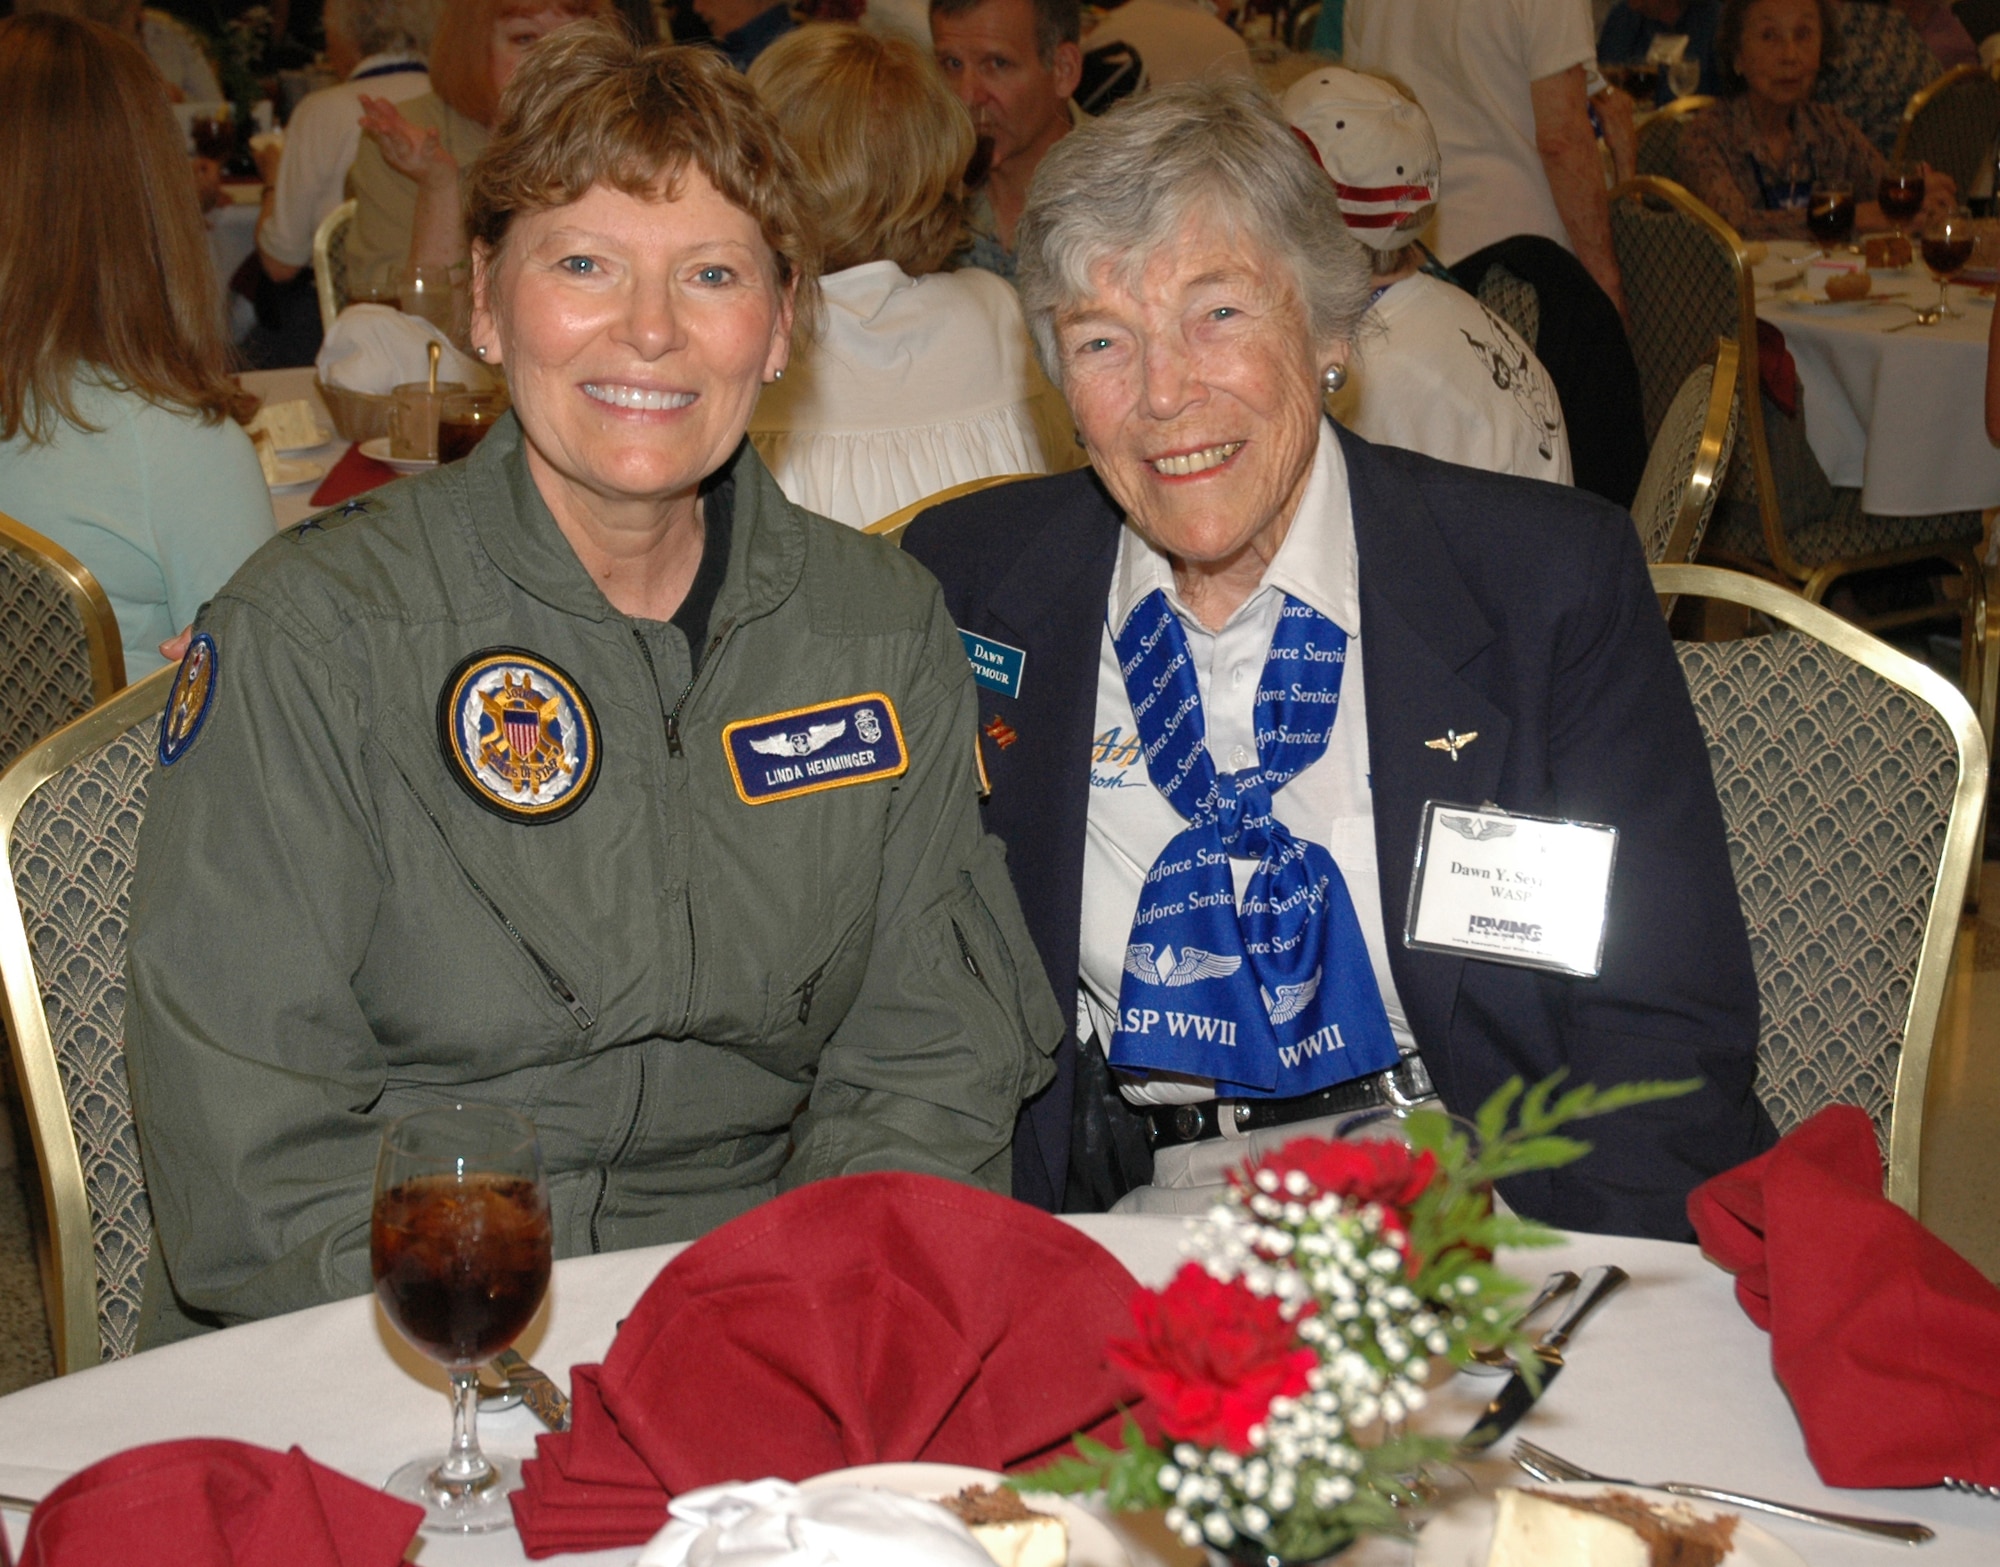 Maj. Gen. Linda Hemminger and former WASP, Dawn Seymour enjoy lunch at the Texas Women's University WASP reunion. (U.S. Air Force Photo by Staff Sgt. Jay Ponder